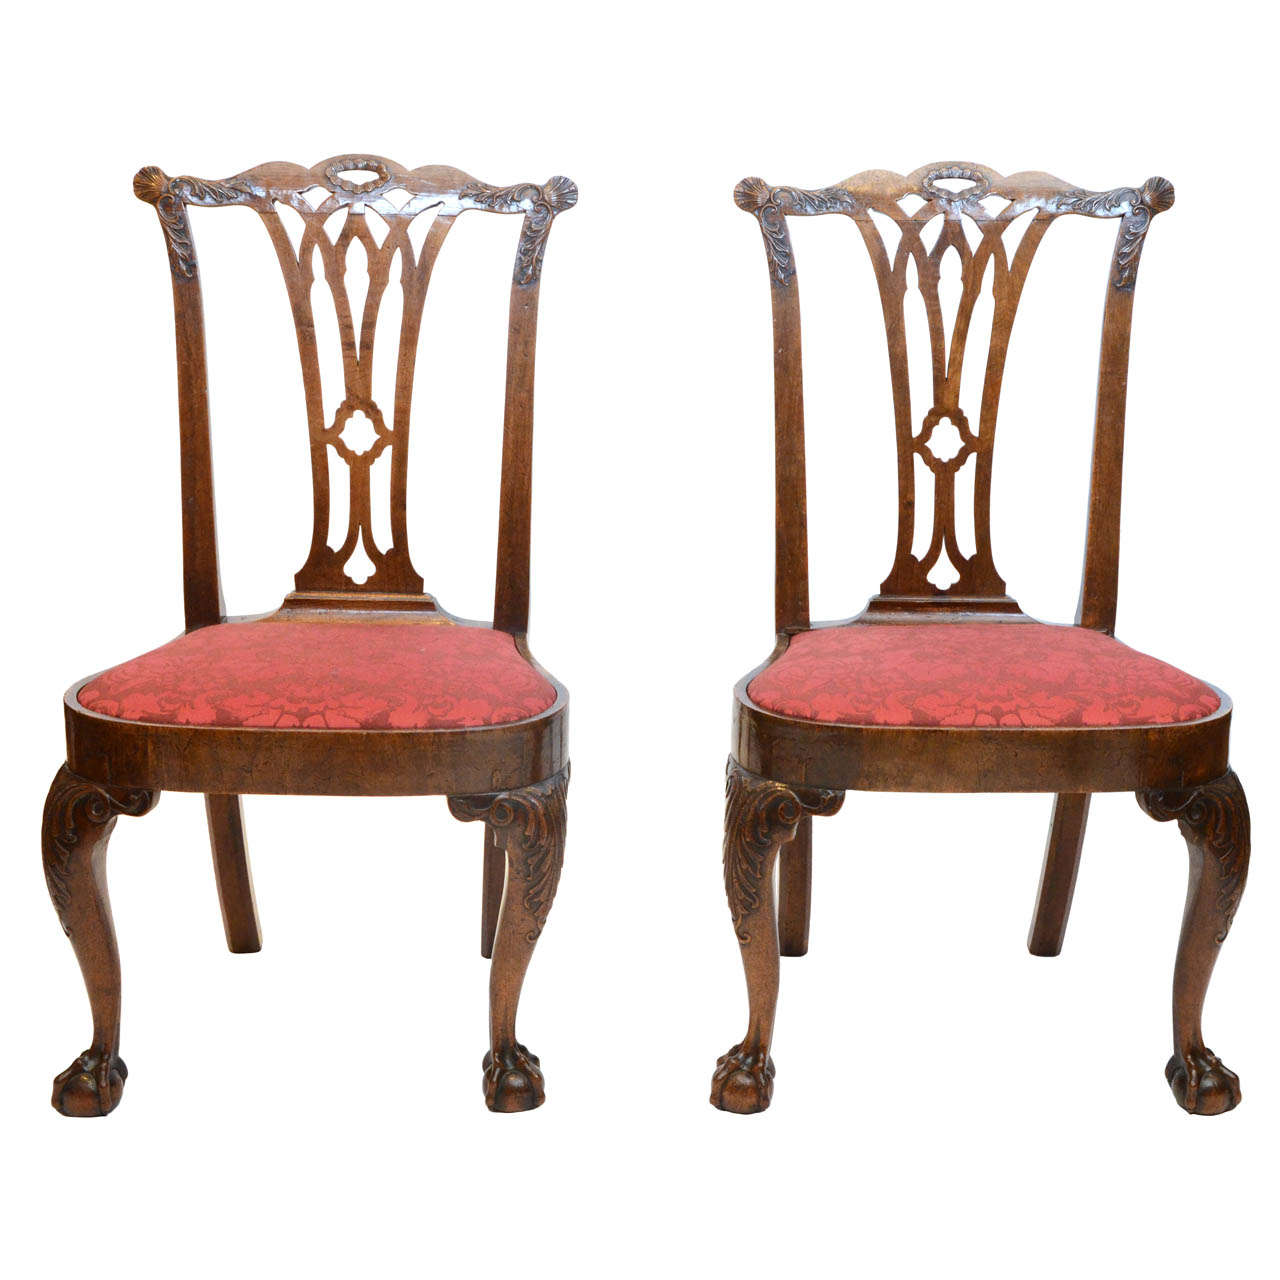 A fine pair of George II period walnut side chairs. For Sale